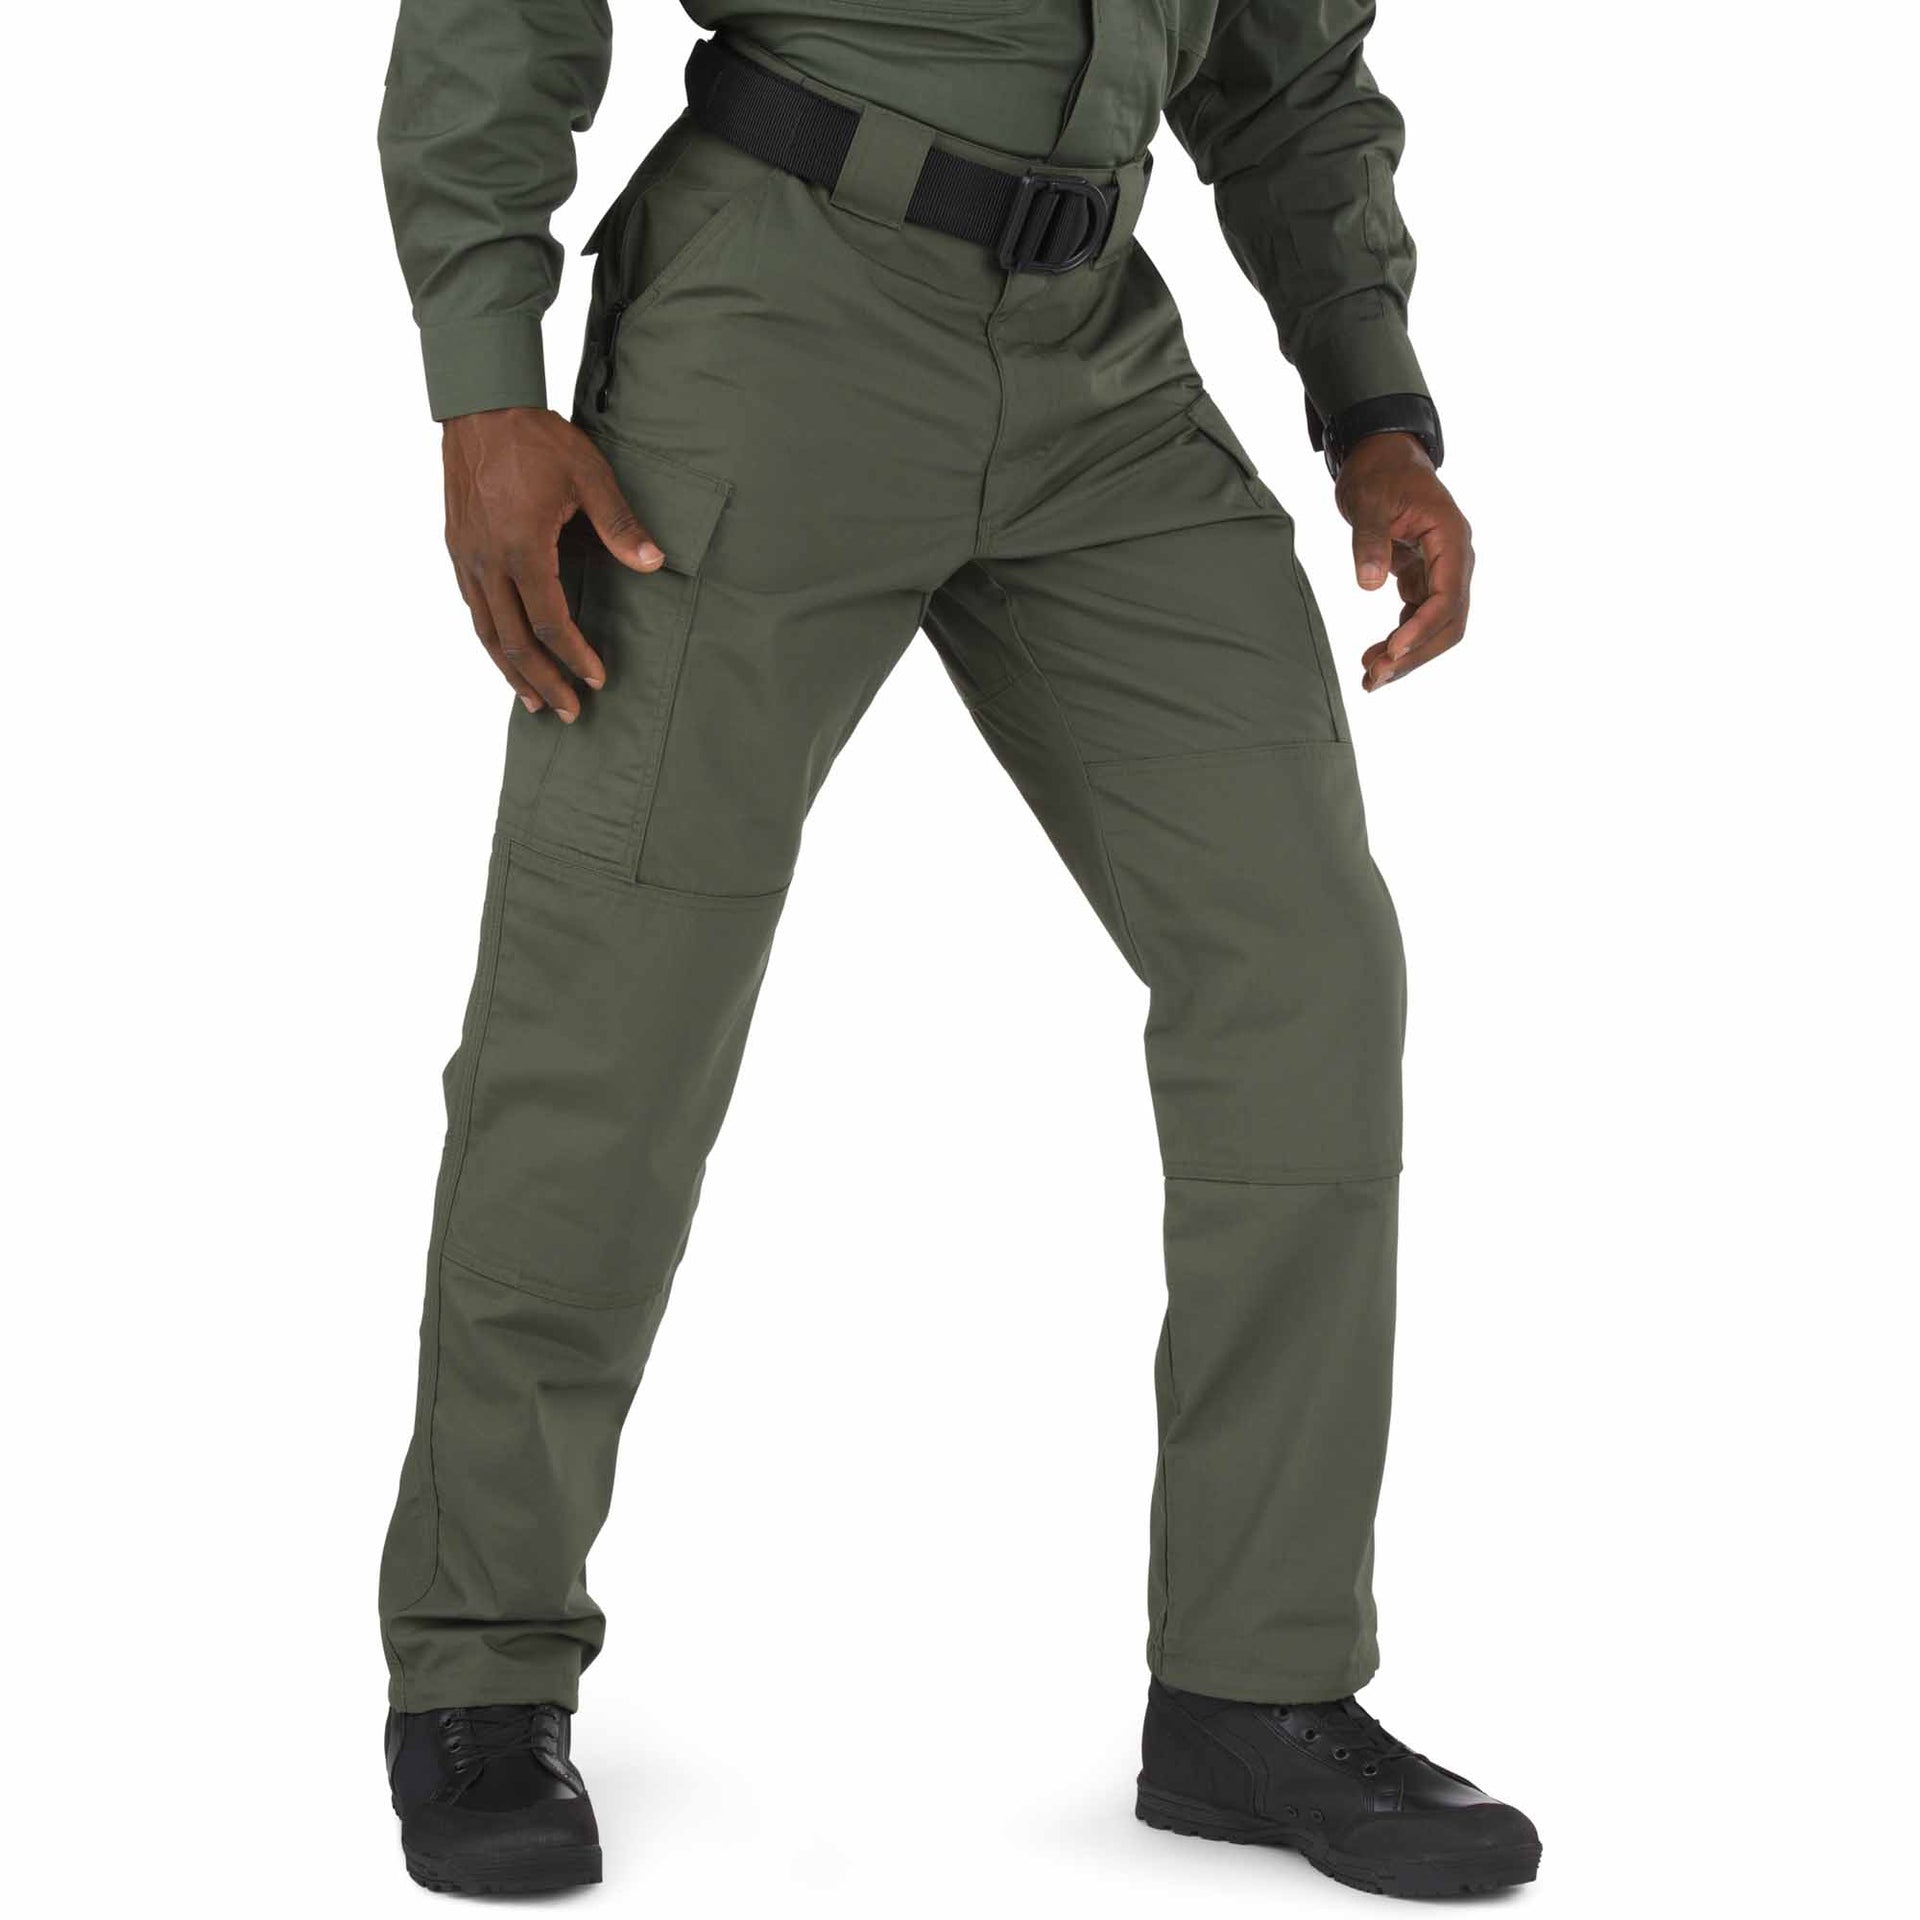 5.11 Tactical TACLITE® TDU® Pant (74280) | The Fire Center | Fuego Fire Center | 5.11’s TACLITE® TDU® Pant is built for rugged, durable, and high-performance. With a self-adjusting tunnel waistband, double-reinforced seat and knees, triple stitching and robust bartacking, these pants are made to last